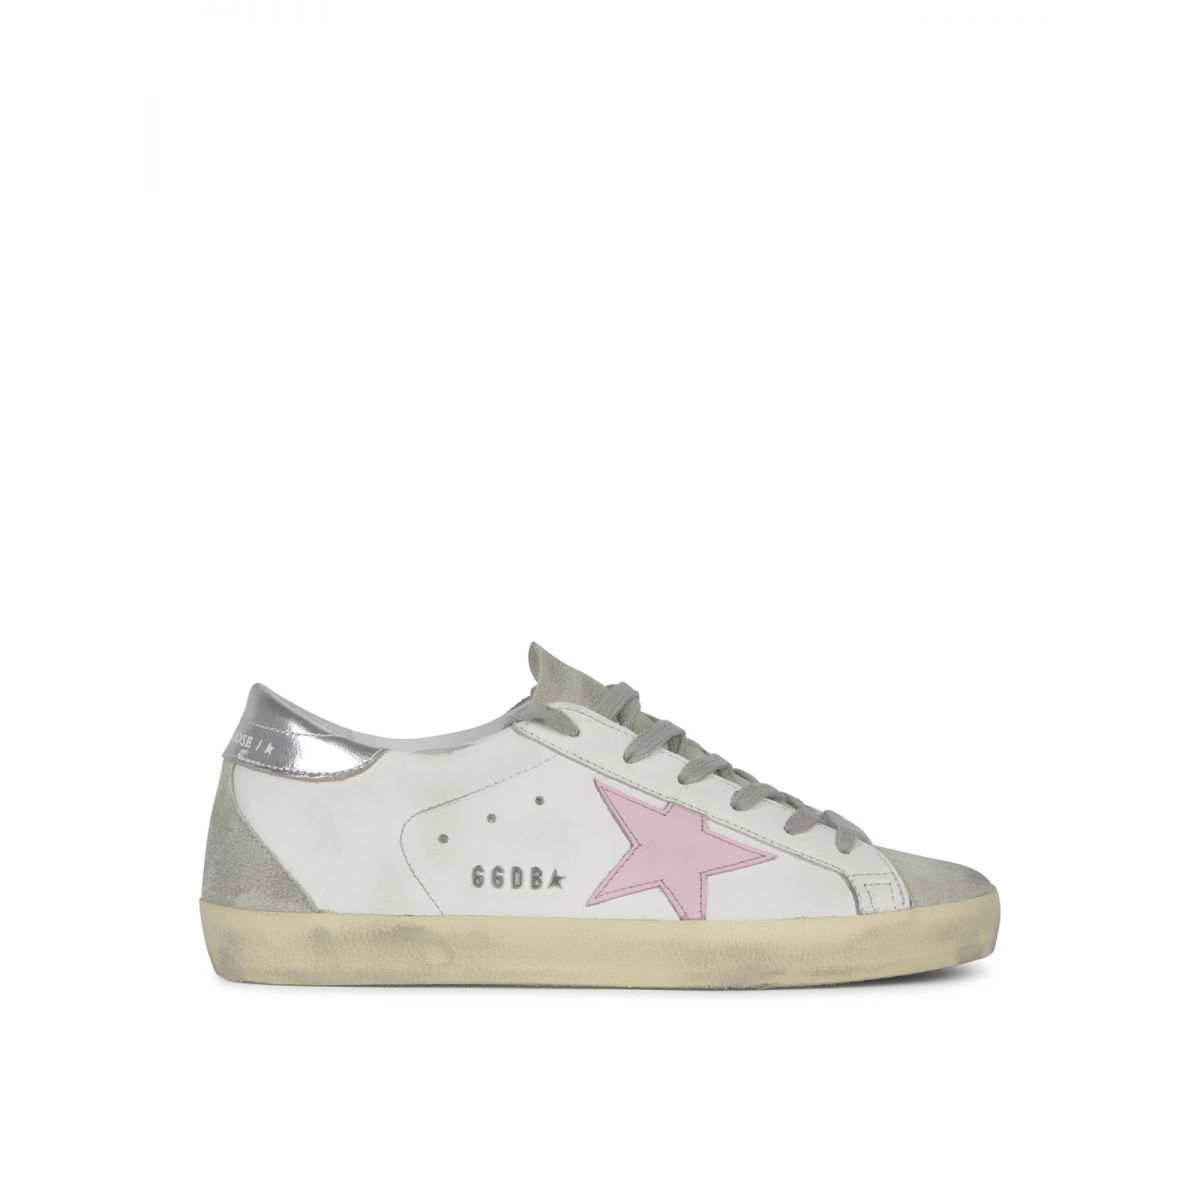 GOLDEN GOOSE - SUPER-STAR LEATHER UPPER AND STAR SUEDE TOE AND SPUR LAMINATED HEEL METAL LETTERING